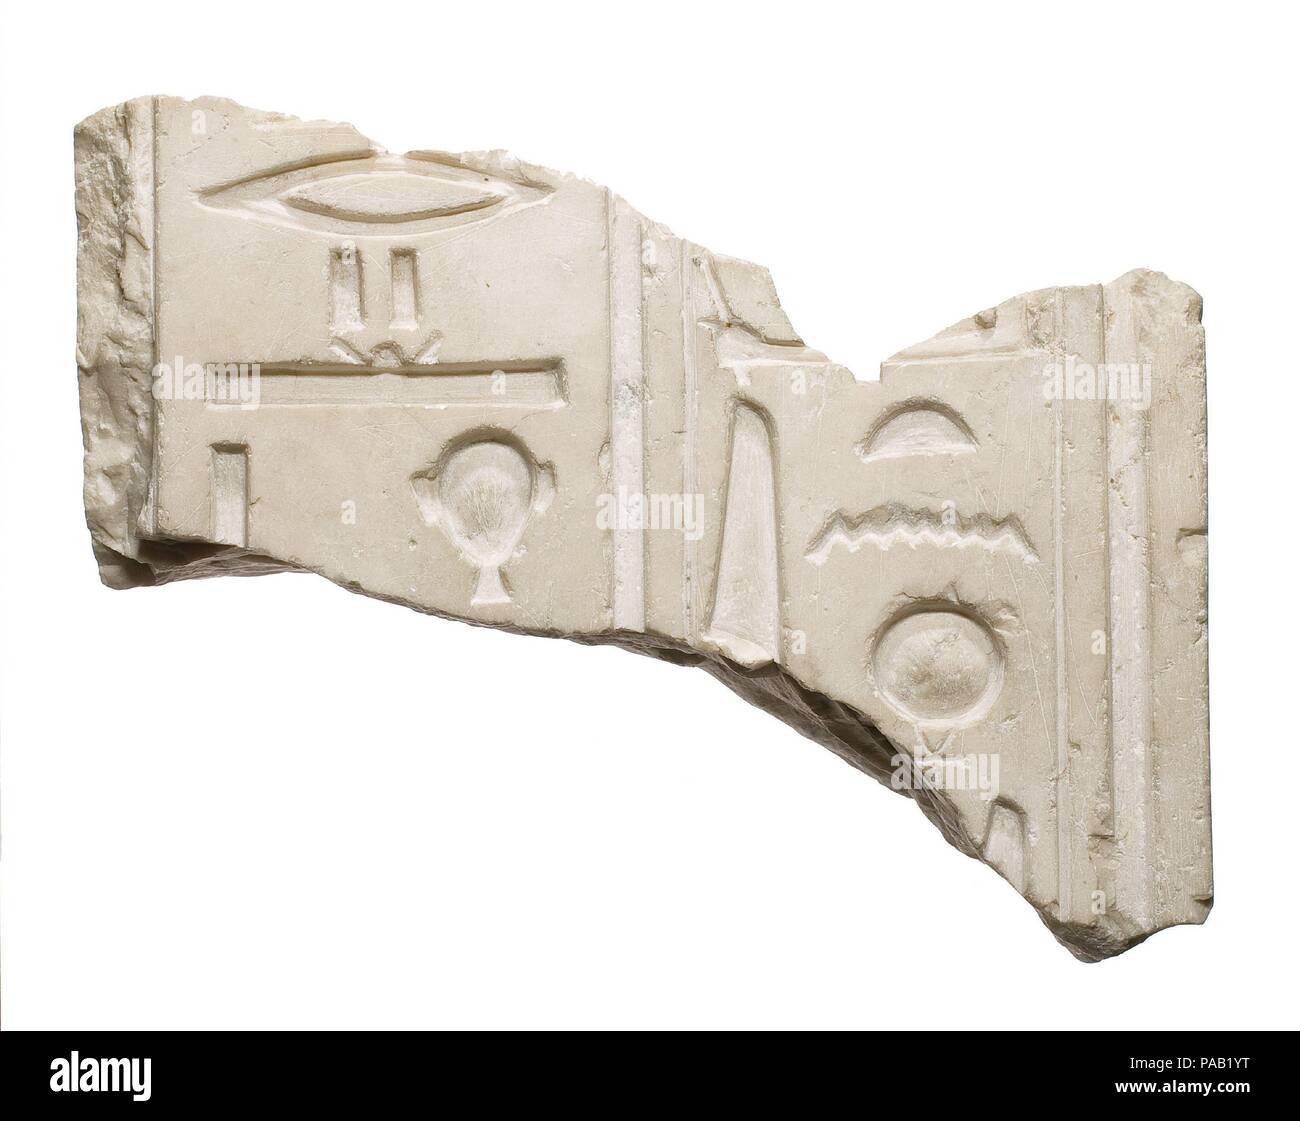 Back pillar fragment (?), Aten and Akhenaten named. Dimensions: H. 14.5 × W. 10 × D. 12 cm (5 11/16 × 3 15/16 × 4 3/4 in.); side edge of b.p. 4.5 cm before narrowing further, with rebate distance on either side of about 1.3 (p.l) -1.5(p.r.) cm to create a b.p. about 10 cm total width at its beginning (whole thing  inclines so as to narrow toward statue). Dynasty: Dynasty 18. Reign: reign of Akhenaten. Date: ca. 1353-1336 B.C.. Museum: Metropolitan Museum of Art, New York, USA. Stock Photo